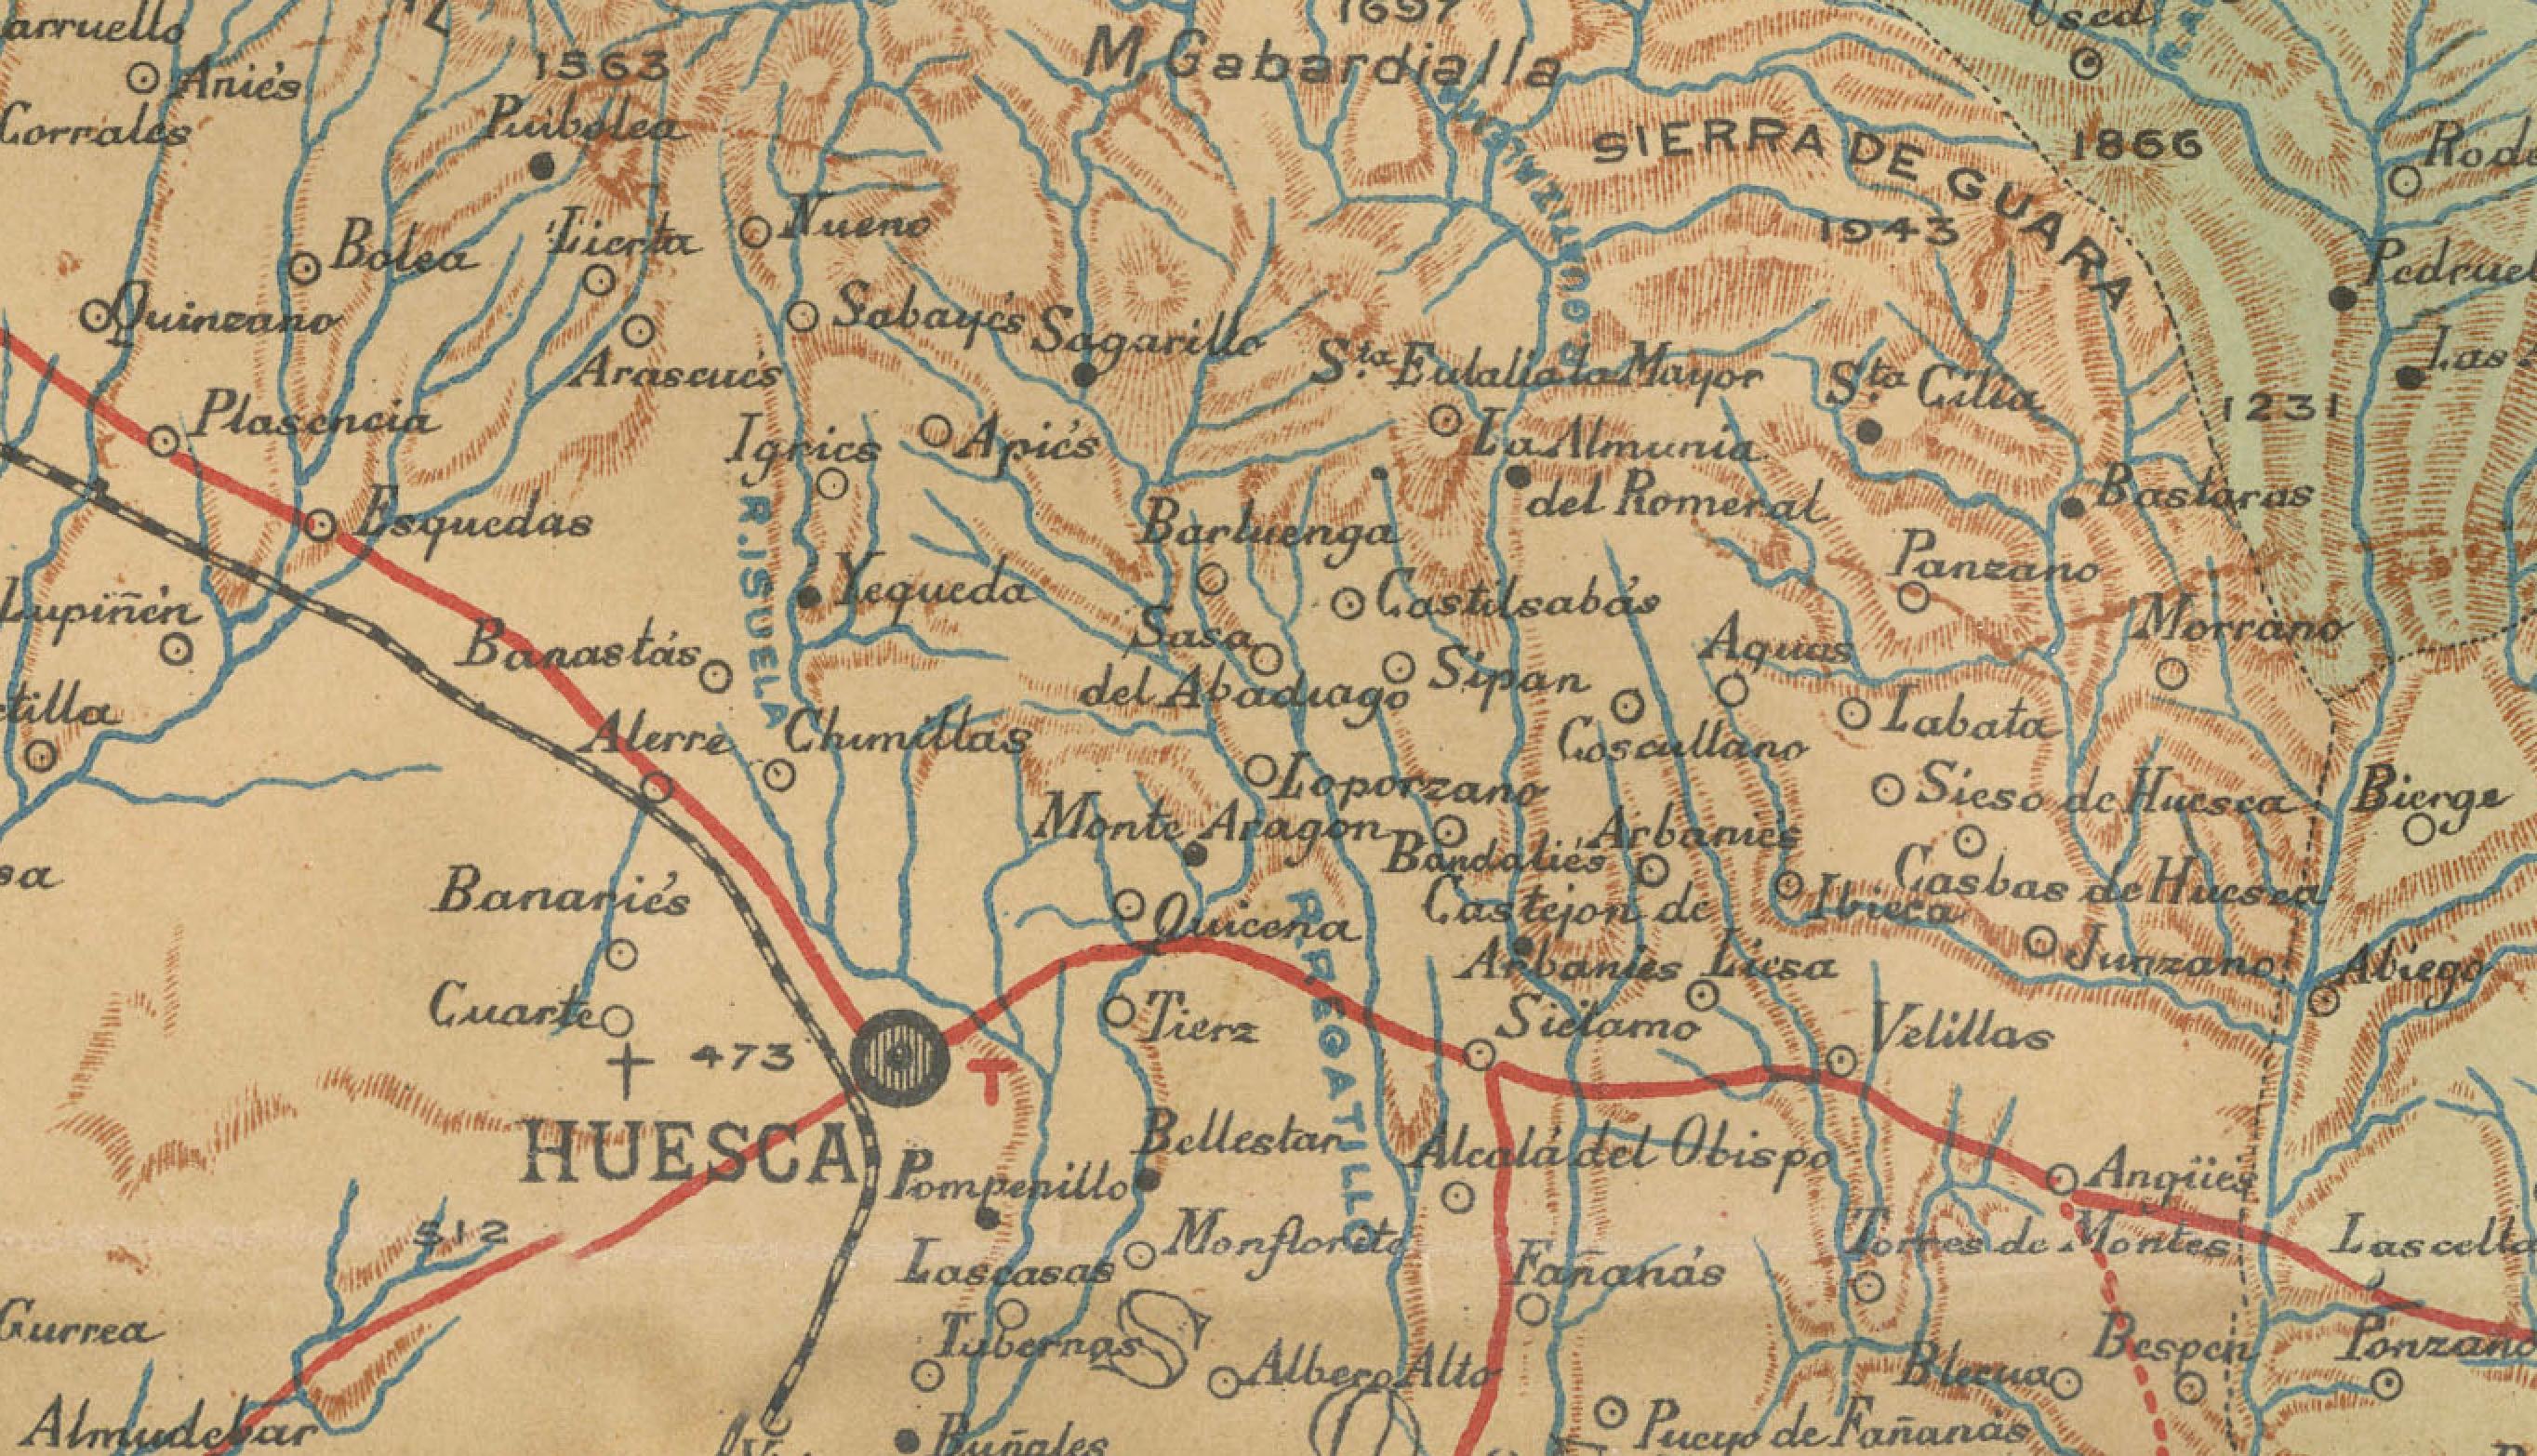 The map provided is of the province of Huesca, located in the northeastern part of Spain, within the autonomous community of Aragon, as of the year 1901. Here are some of the key features depicted on the map:

The map illustrates the province's